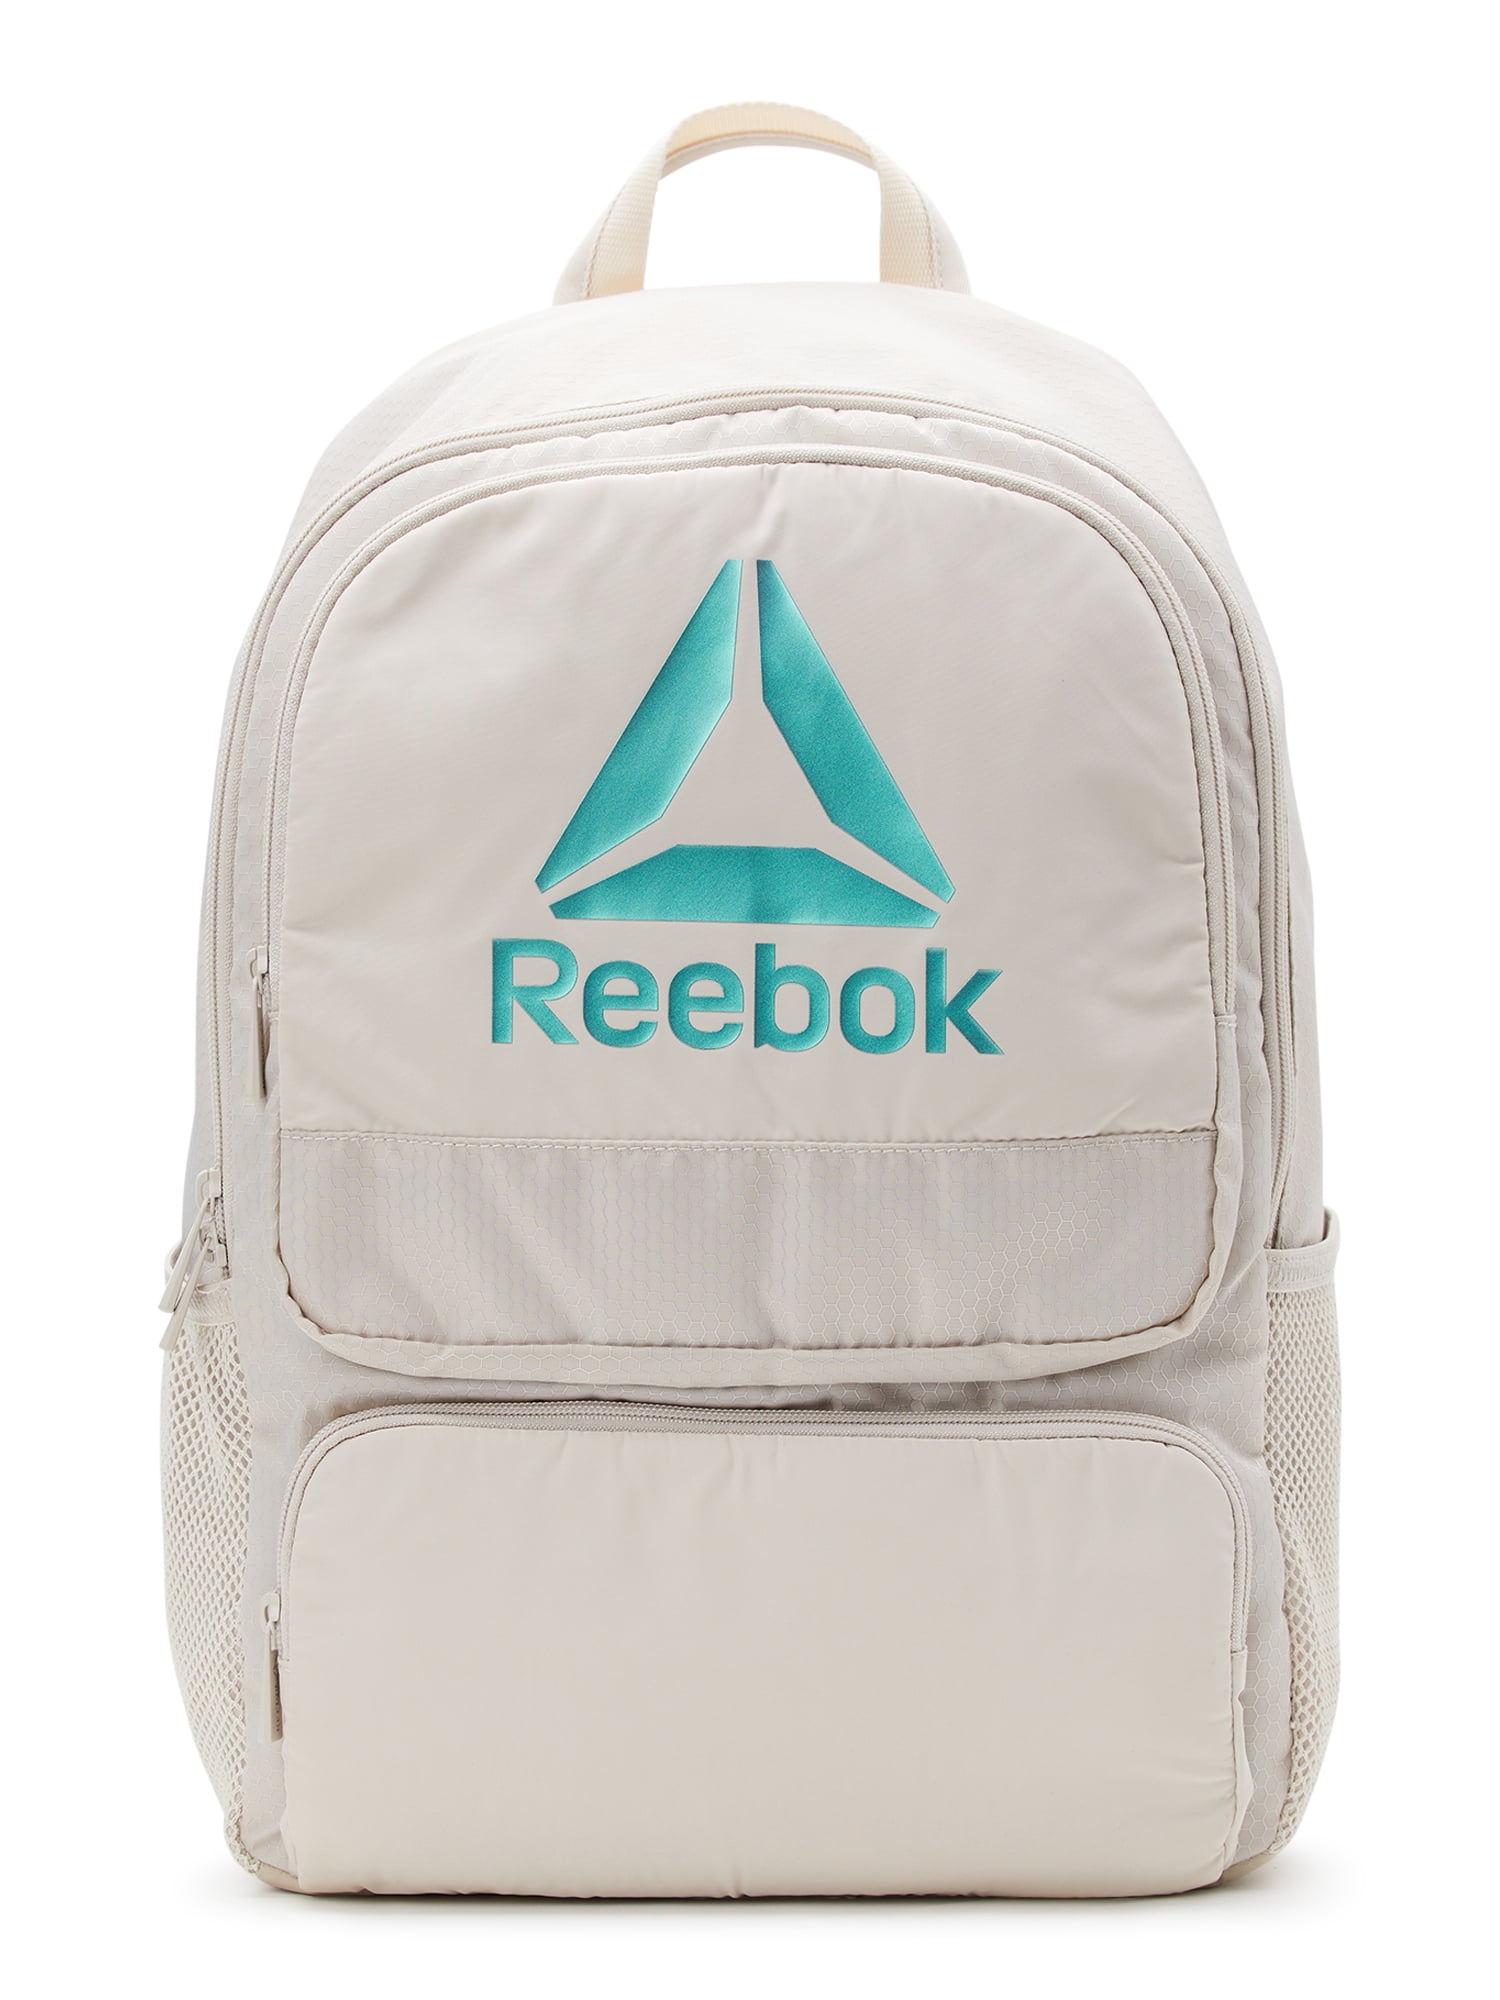 Reebok Women’s Adult Laptop Paige Backpack with Iridescent Logo, Pumice ...